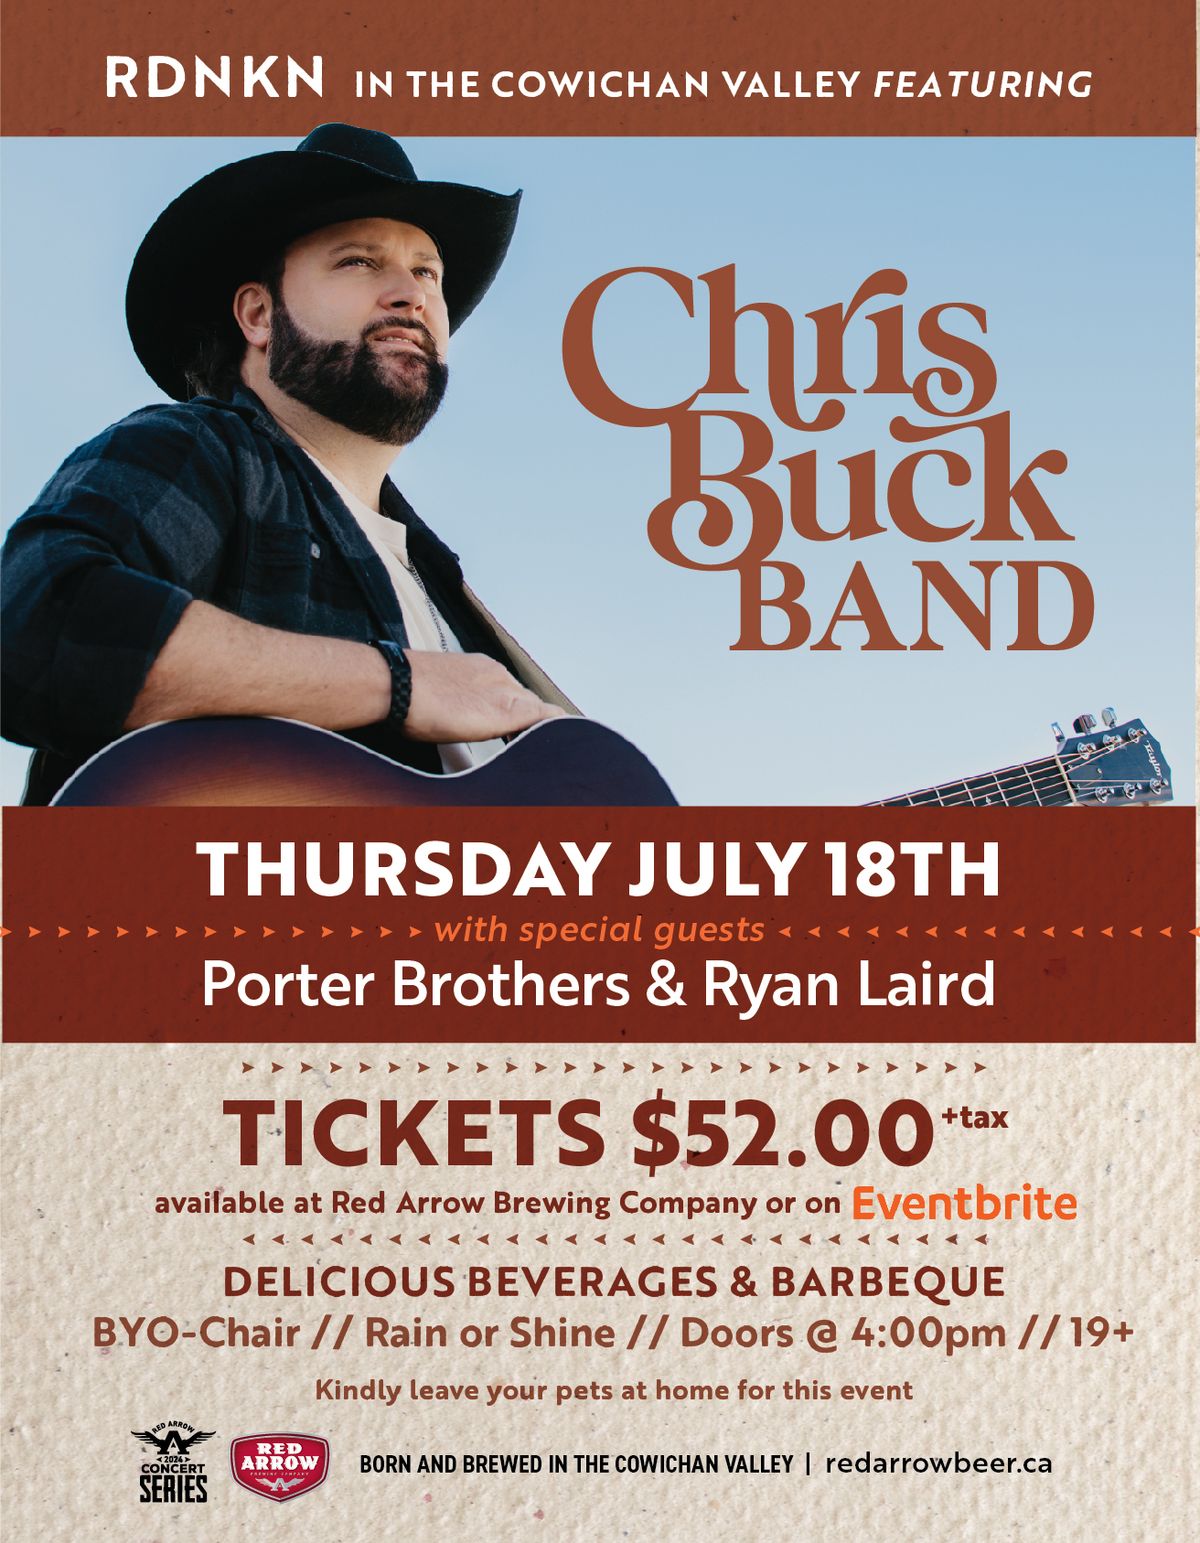 Chris Buck Band, The Porter Brothers, & Ryan Laird at Red Arrow Brewing